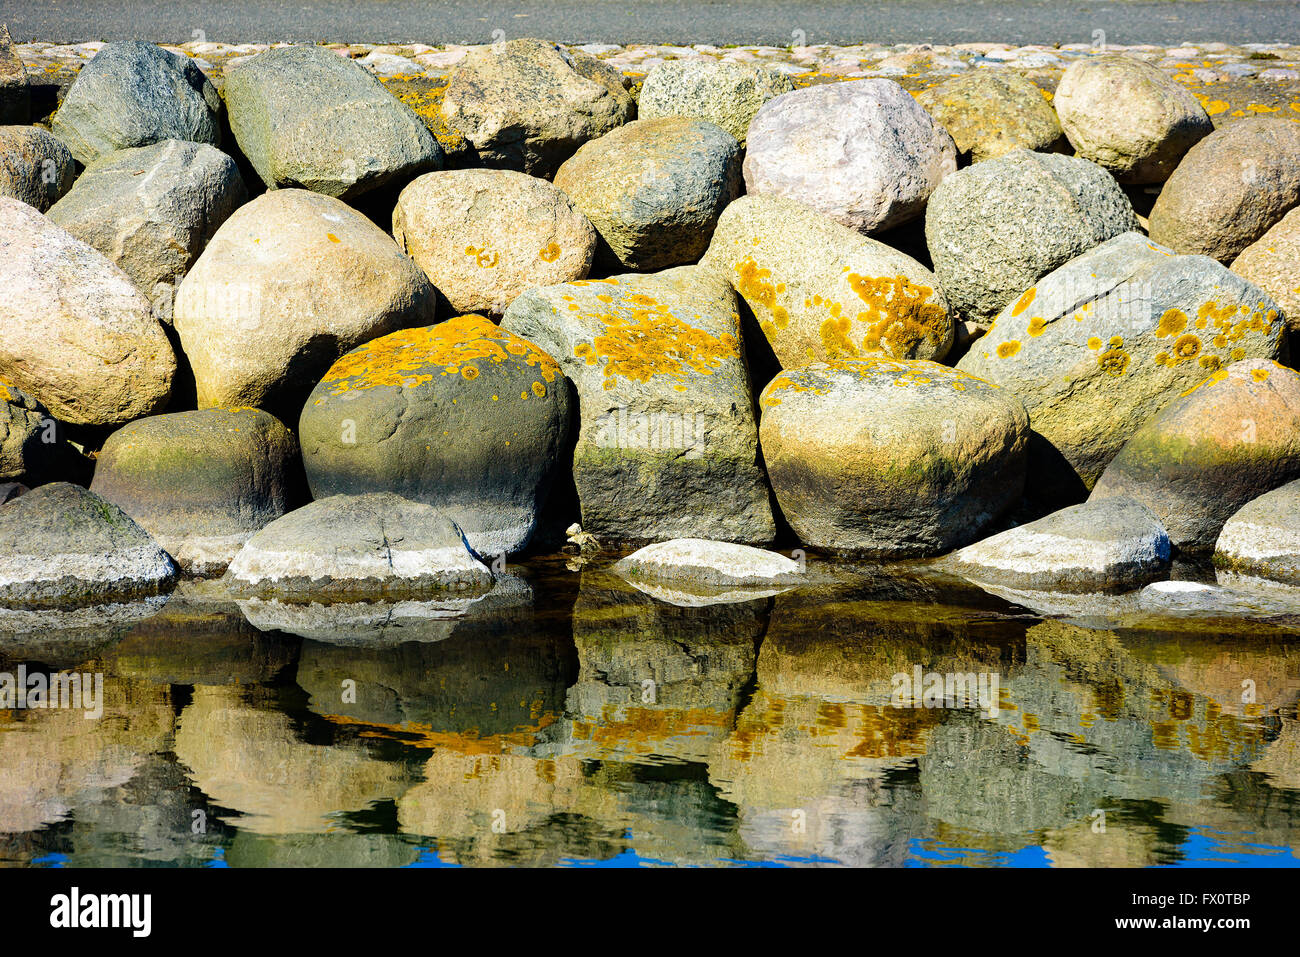 Close up of a stone pier with lichen covered granite boulders. Seawater with fine reflections in lower part and some pavement vi Stock Photo